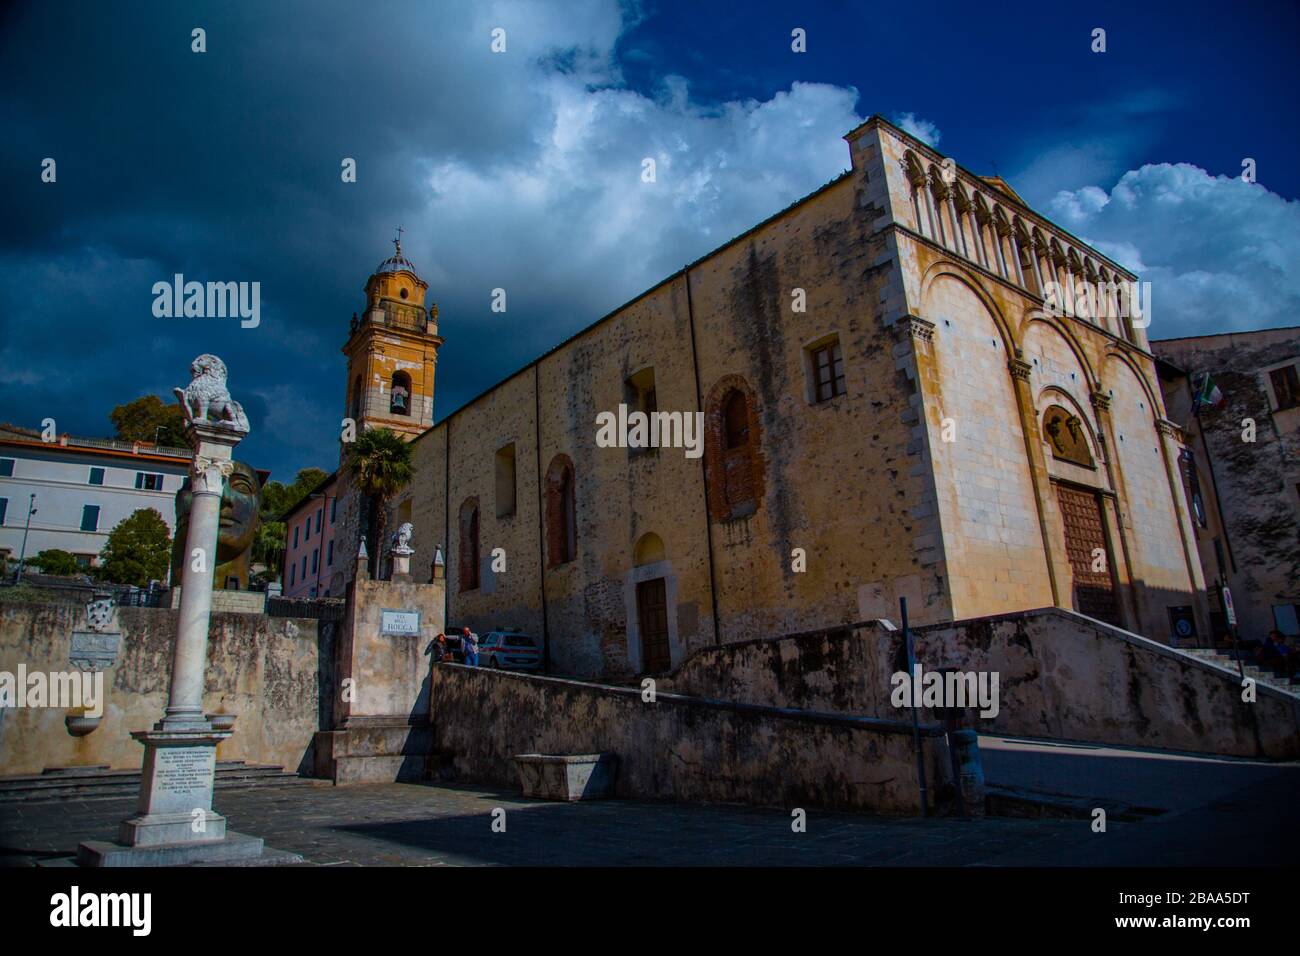 The Cathedral San Cerbone situated in the main square of Massa, Italy in a beautiful summer day. Stock Photo